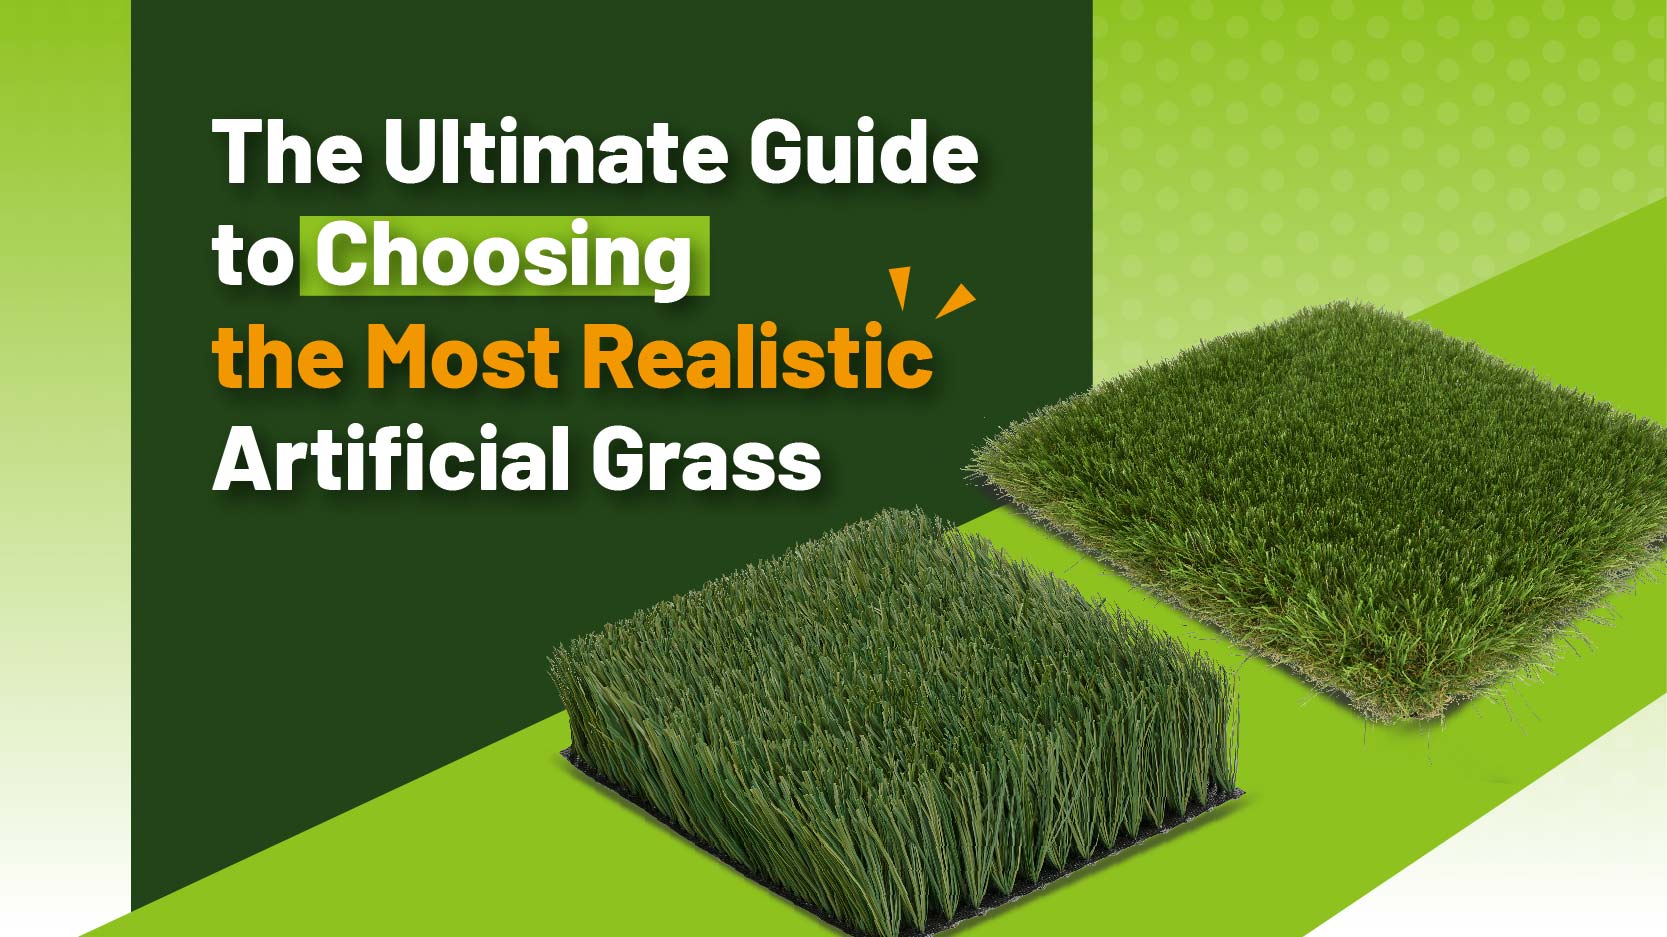 The Ultimate Guide to Choosing the Most Realistic Artificial Grass